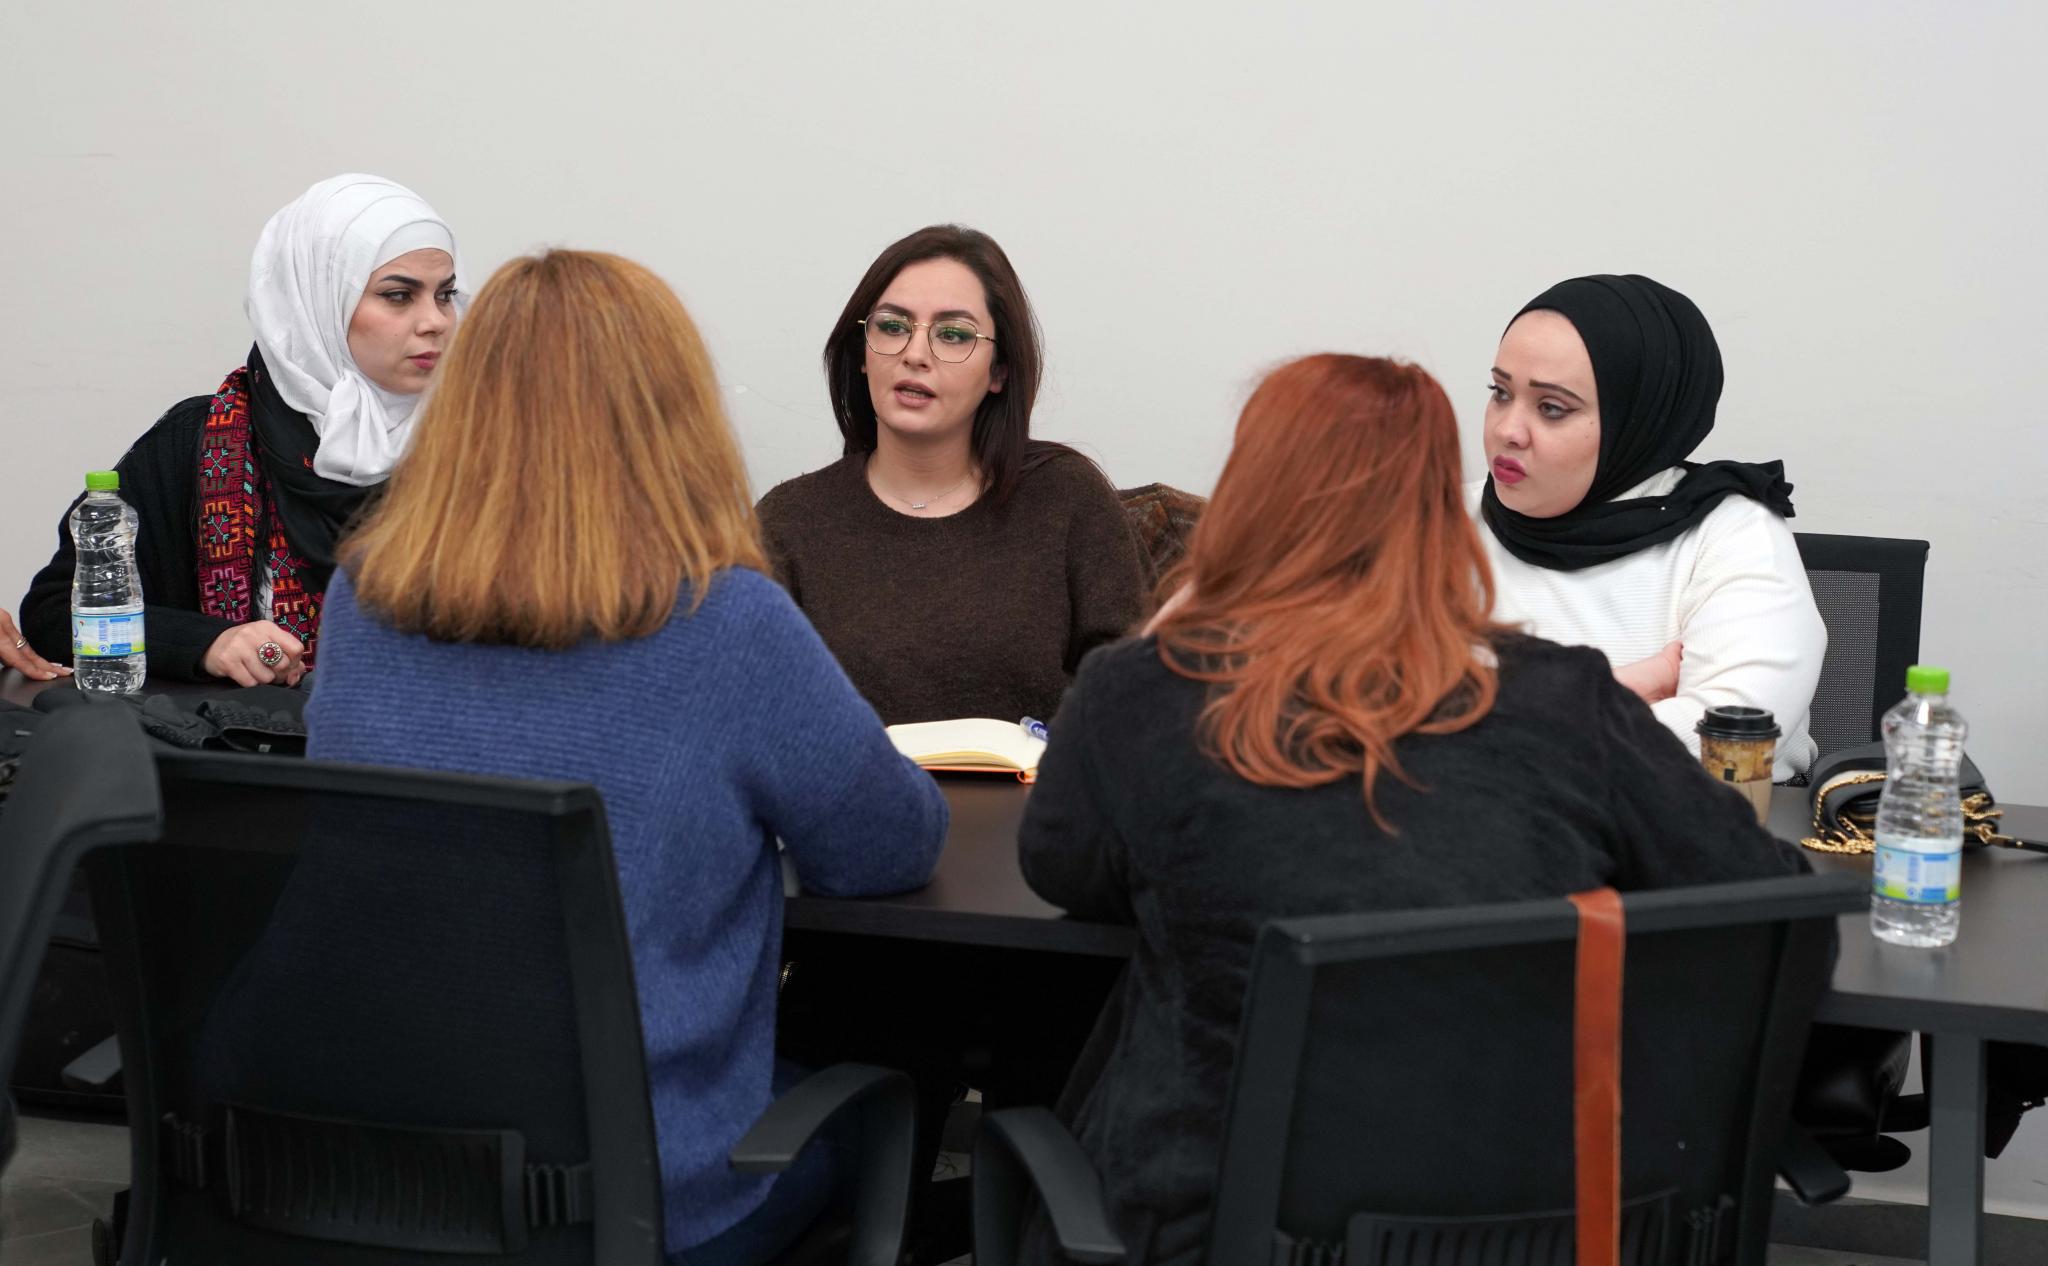 Dr. Sa’eb Iriqat lectures in an academic meeting for Conflict Resolution students in AAUP and Conflict Analyzing and Resolution from George Mason University